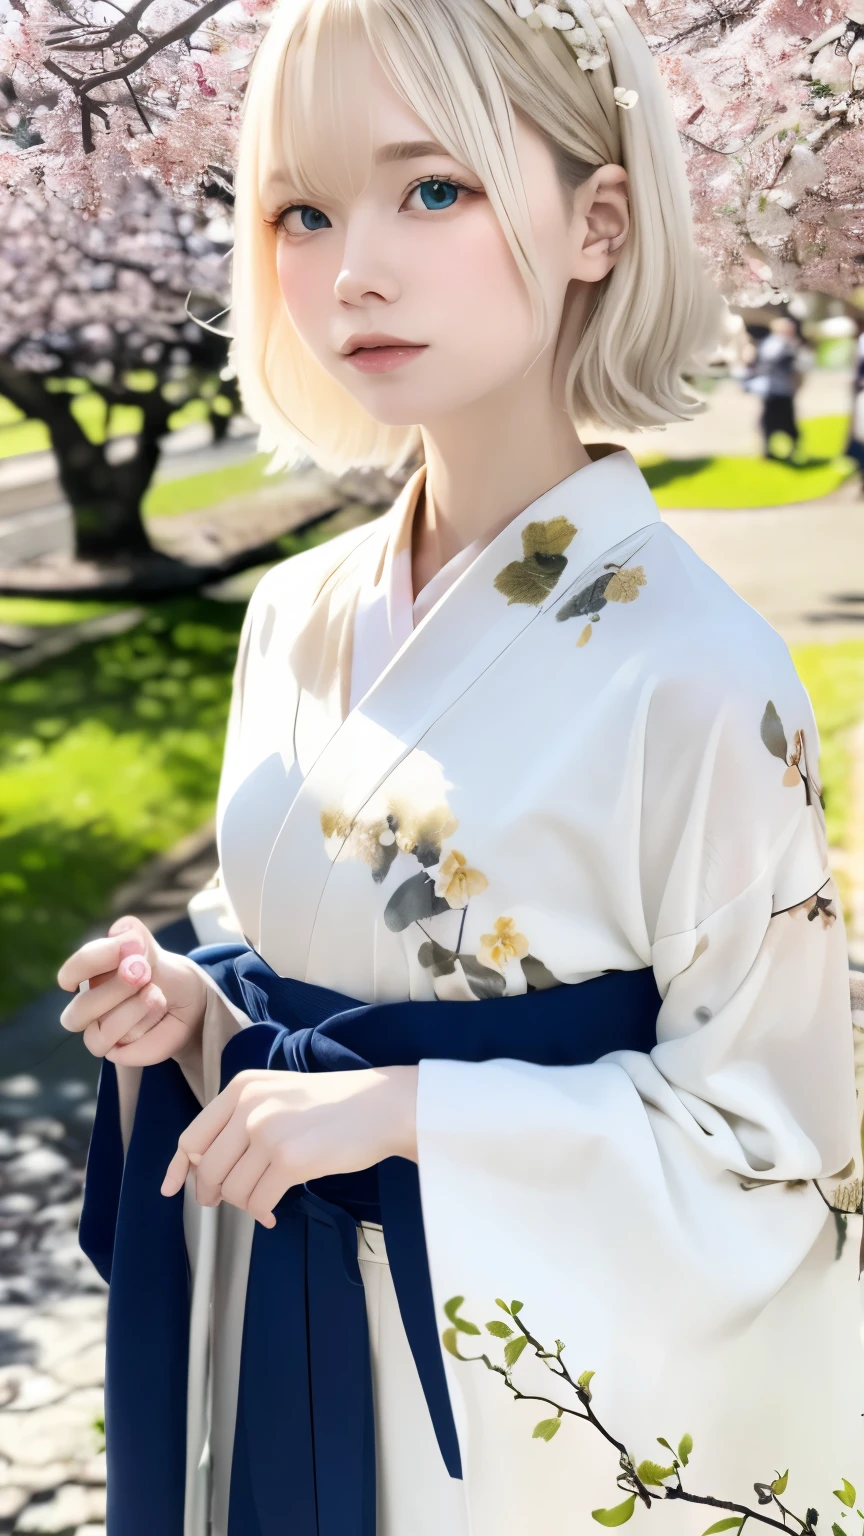 (kimono)、Japanese clothing、(highest quality,masterpiece:1.3,超A high resolution,),(Super detailed,caustics),(Photoreal:1.4,RAW shooting,)ultra-realistic capture,very detailed,High resolution 16K suitable for human skin、 Natural skin texture、、Skin tone looks even and healthy、 Use natural light and color,one woman,Japanese,,cute,Beautiful silky silver hair,middle hair,(Depth of written boundary、chromatic aberration、wide lighting range、natural shading、)、(hair swaying in the wind:1.3)、(Cherry tree in full bloom:1.3)、Someiyoshino、Beautiful town of Kyoto